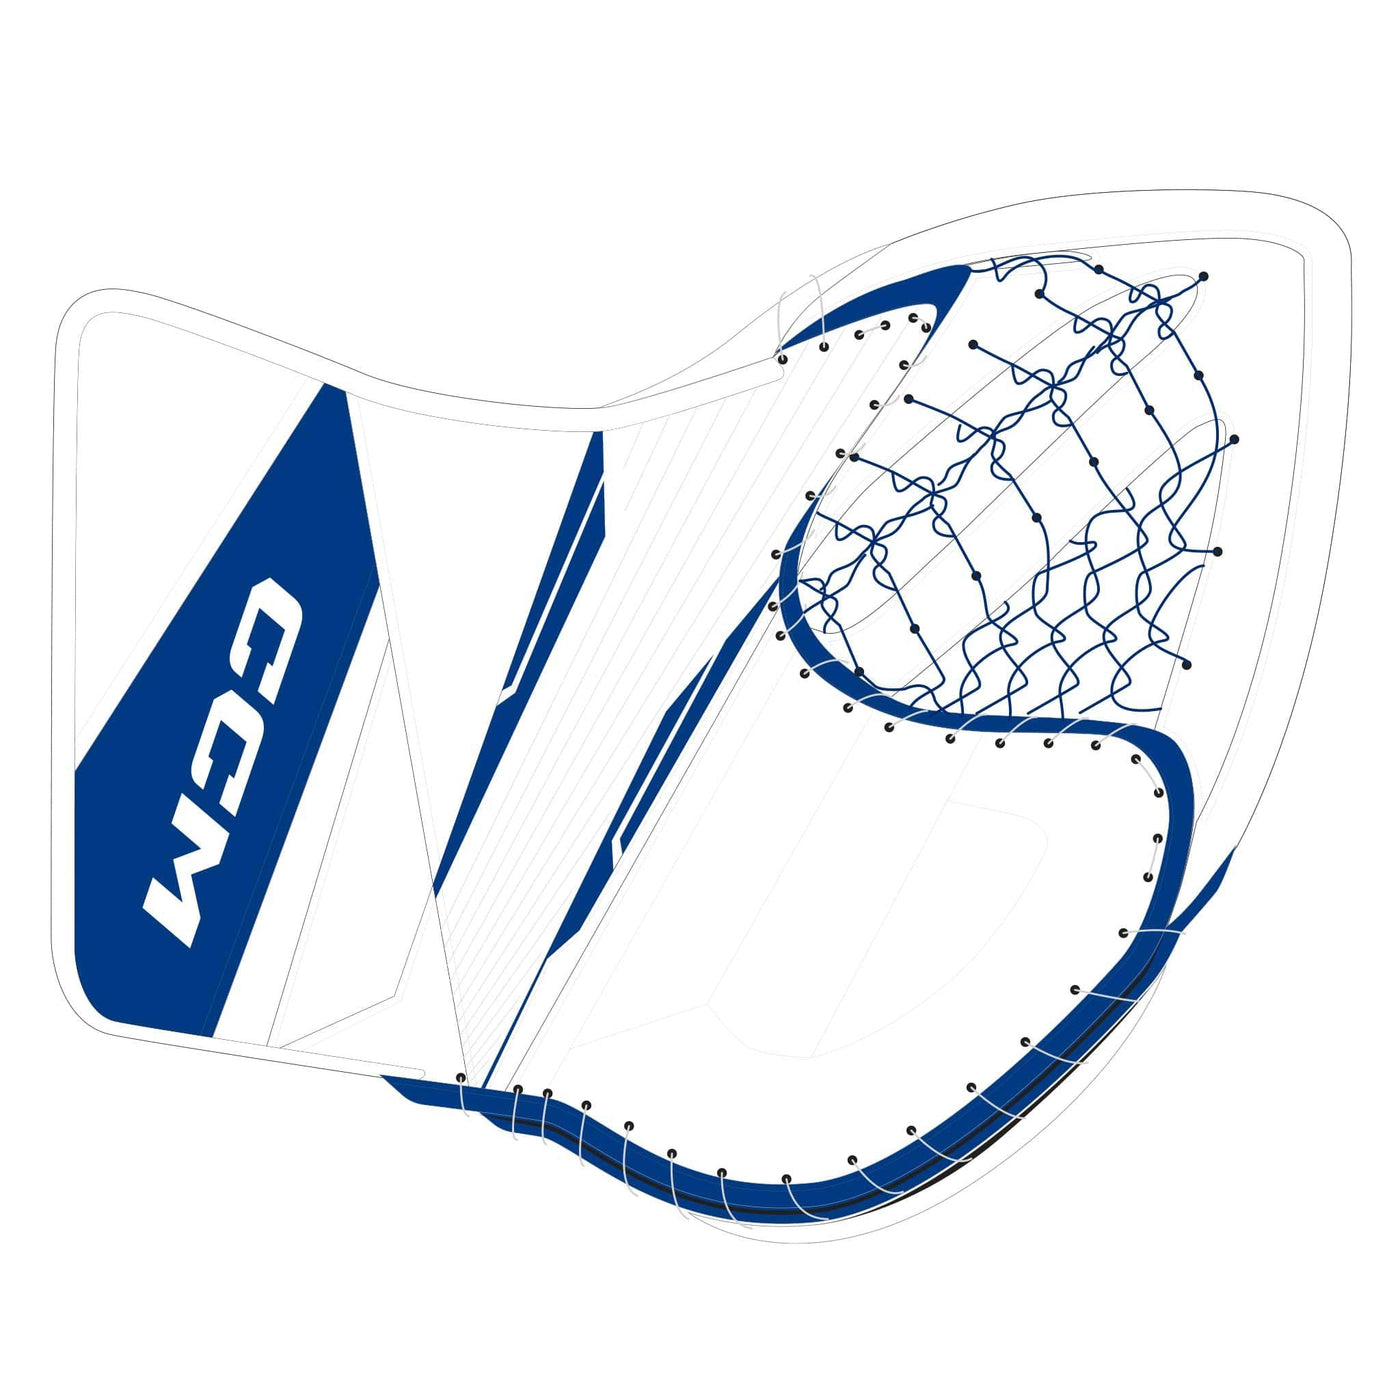 CCM Axis 2.5 Junior Goalie Catcher - Source Exclusive - The Hockey Shop Source For Sports